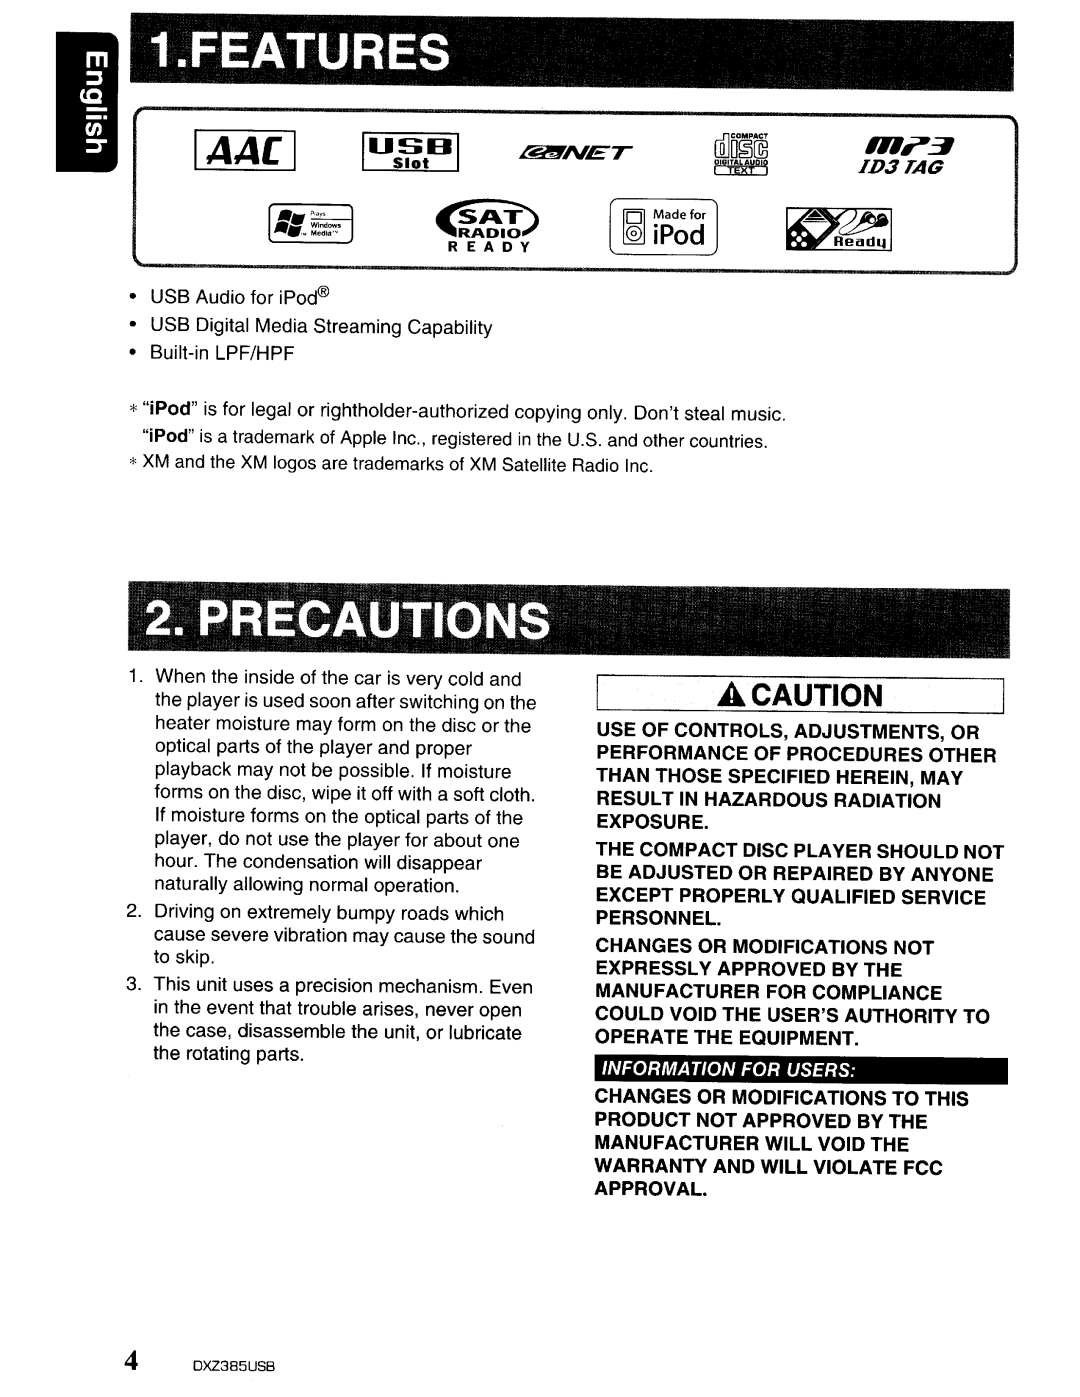 Clarion DXZ385US8 owner manual Features, Precautions, A Caution, IAACI IUS~tHI rB!fINET, RA~IO- @J iPod, ID3TAG 